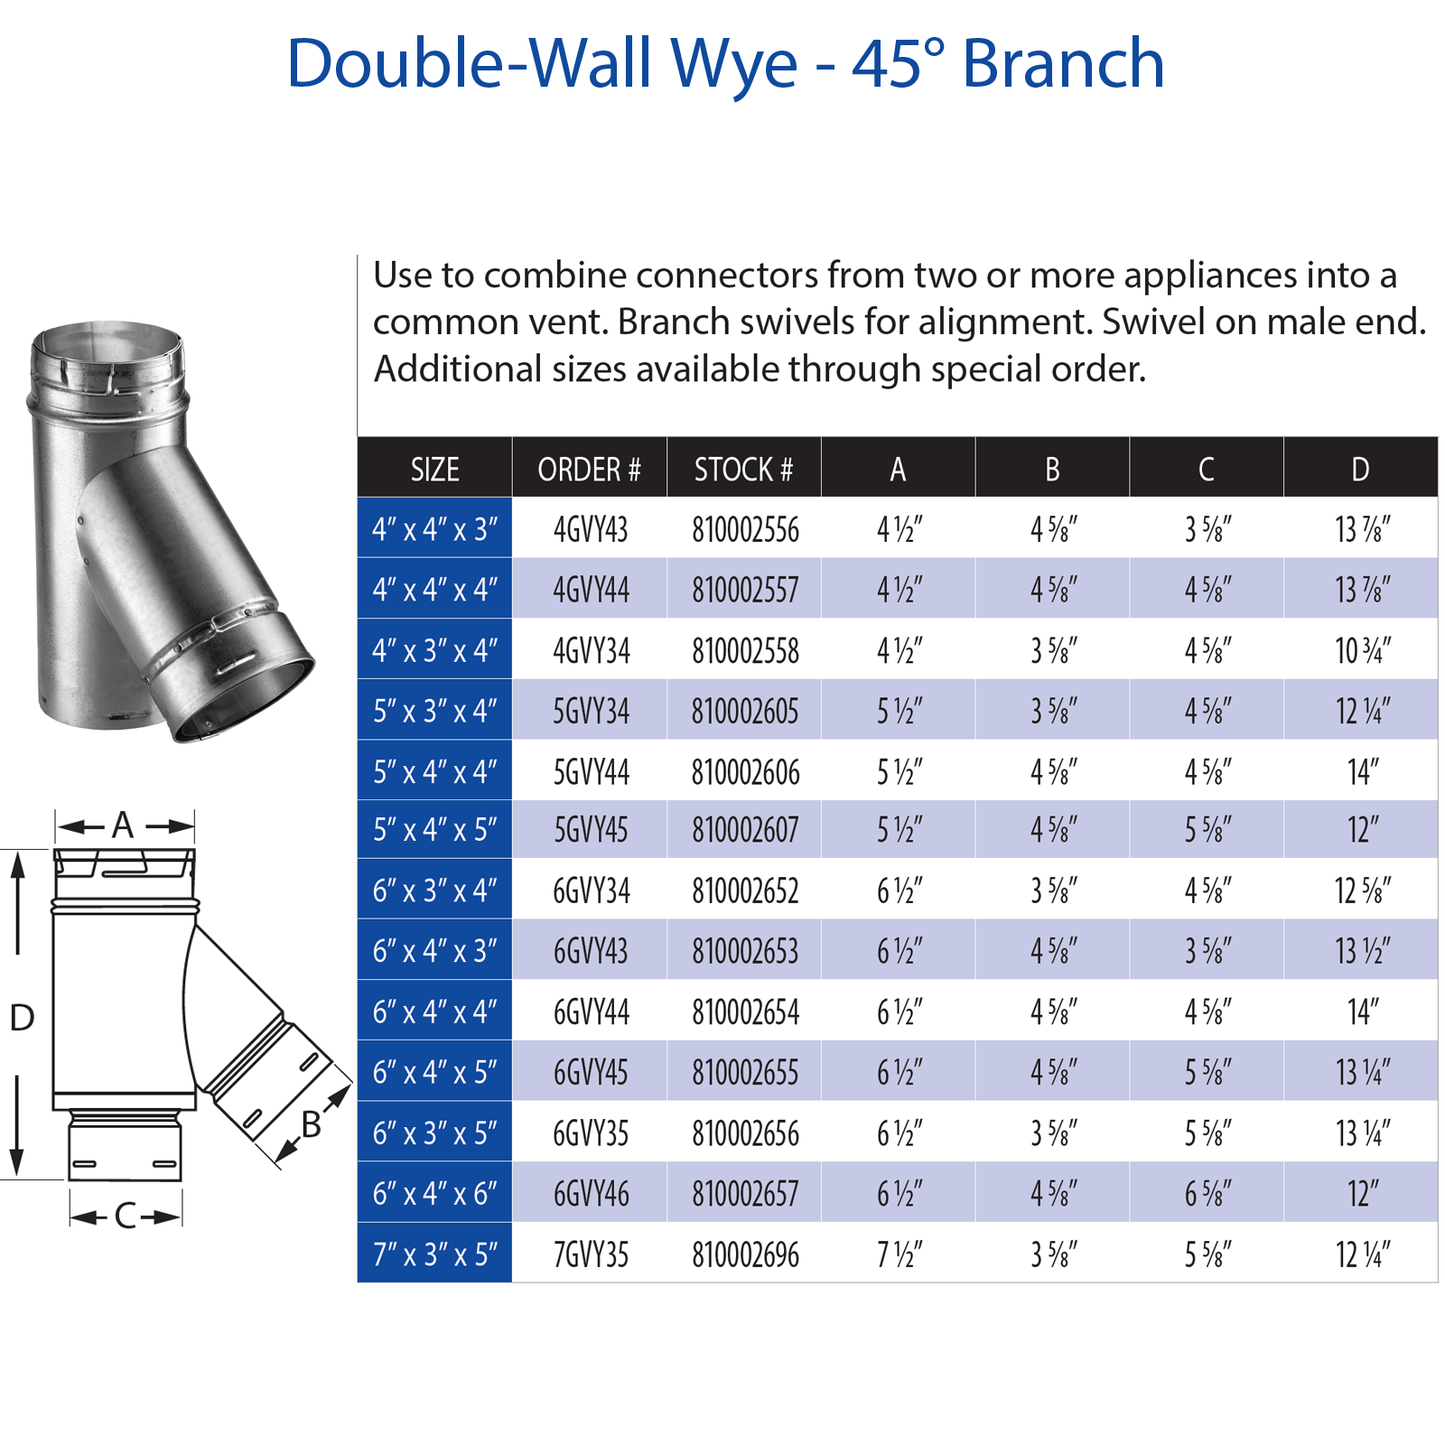 DuraVent Type B 6" x 4" x 6" Double-Wall WYE - 45 Degree Br | 6GVY46